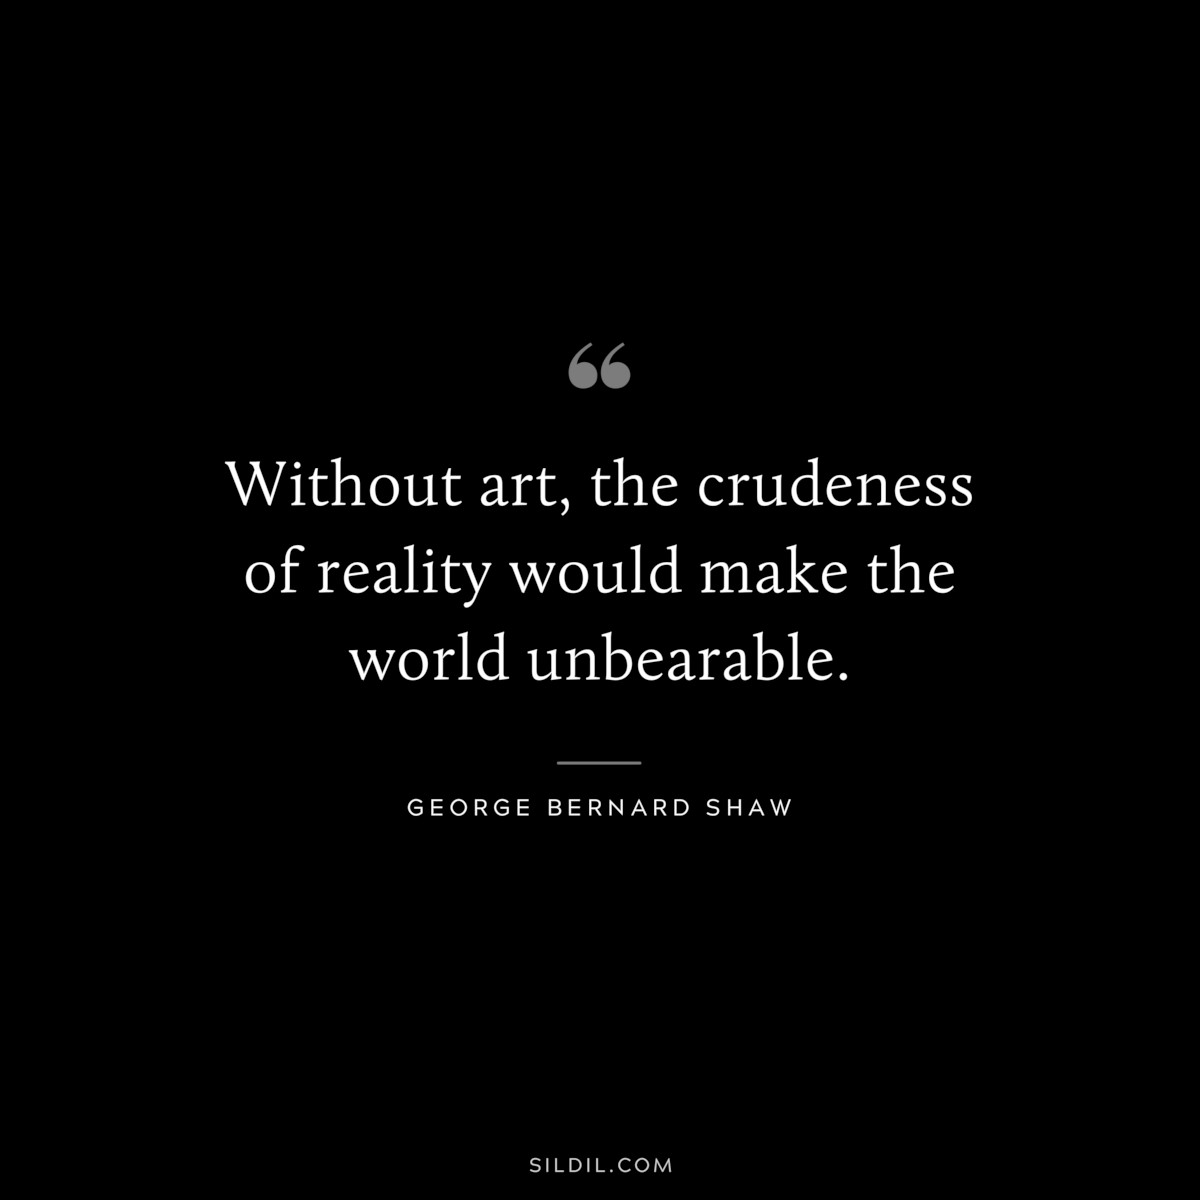 Without art, the crudeness of reality would make the world unbearable. ― George Bernard Shaw